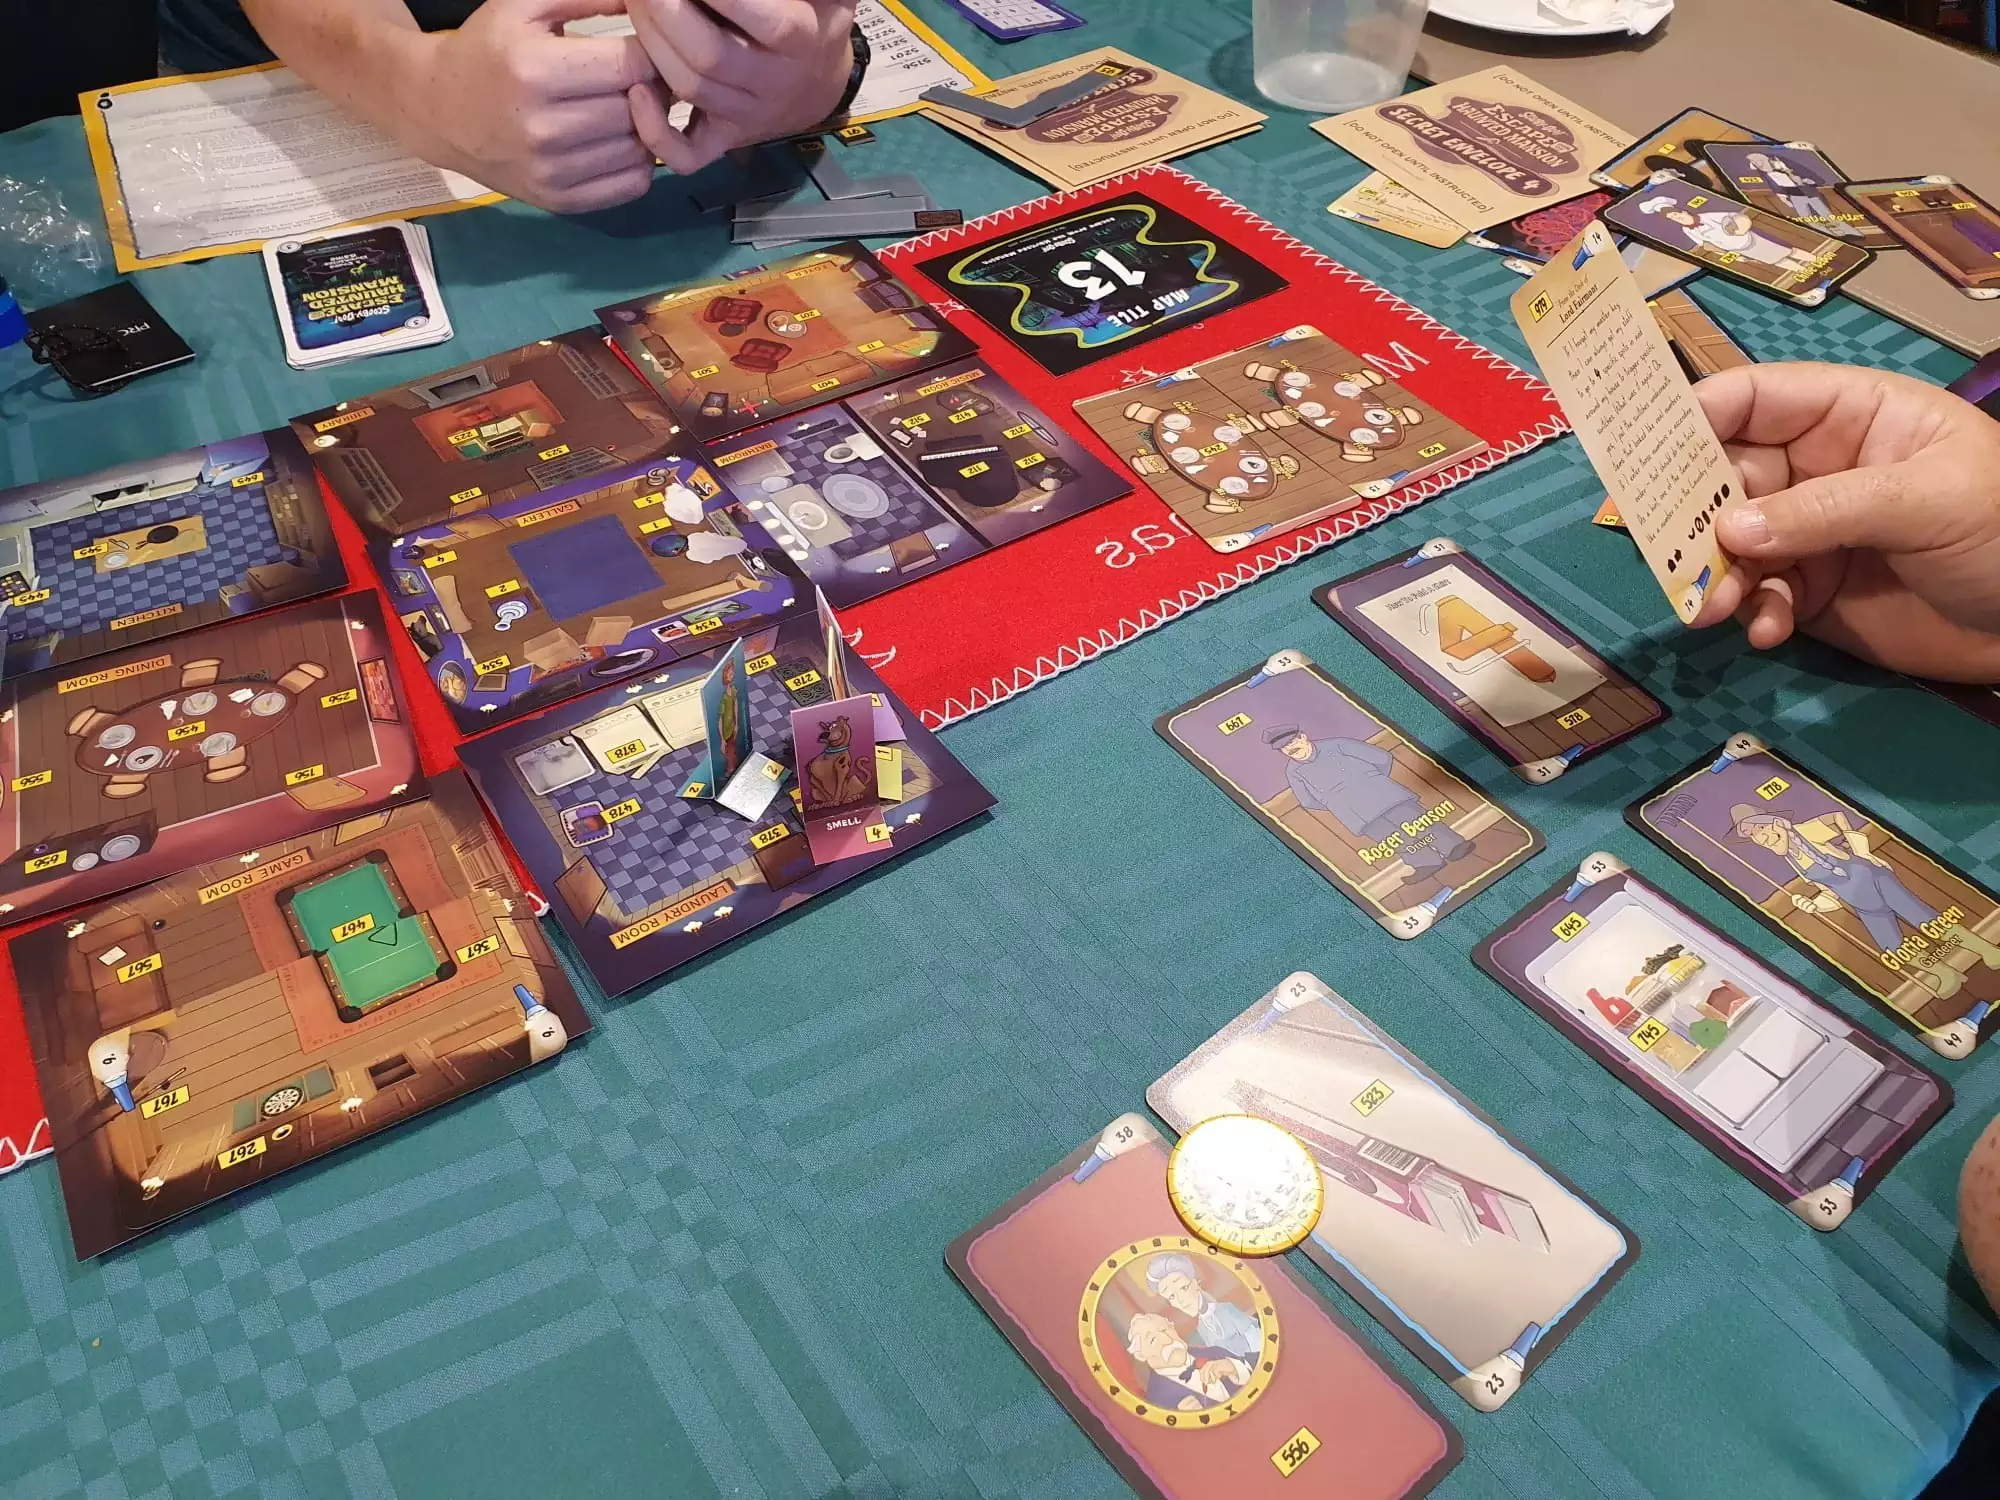 Playing the "Scooby Doo Escape from the Haunted Mansion" escape room board game